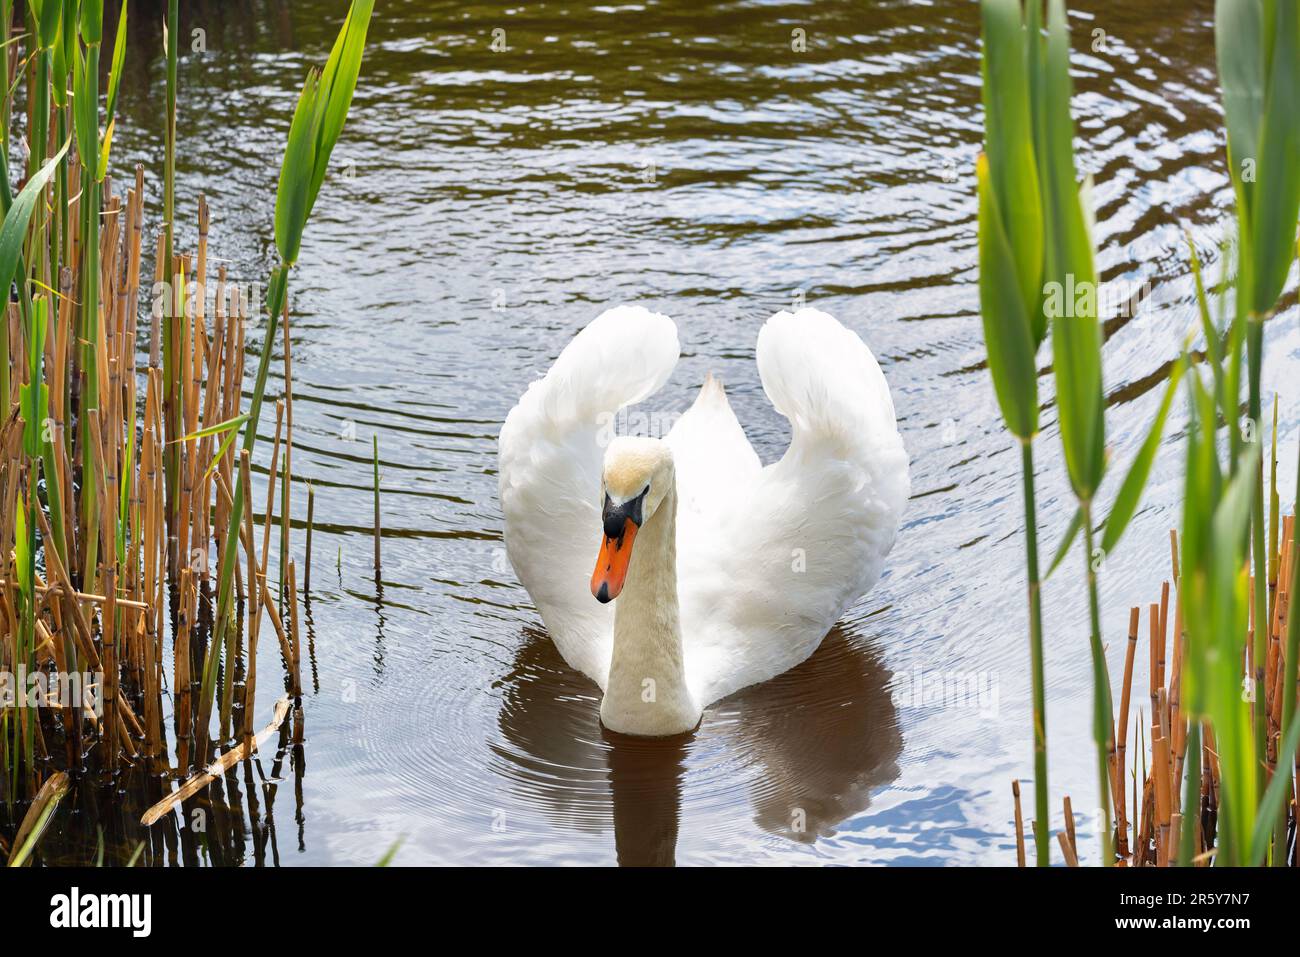 The white swan on the water surface of the lake guards its territory with its wings slightly spread. Wild bird in nature. Stock Photo